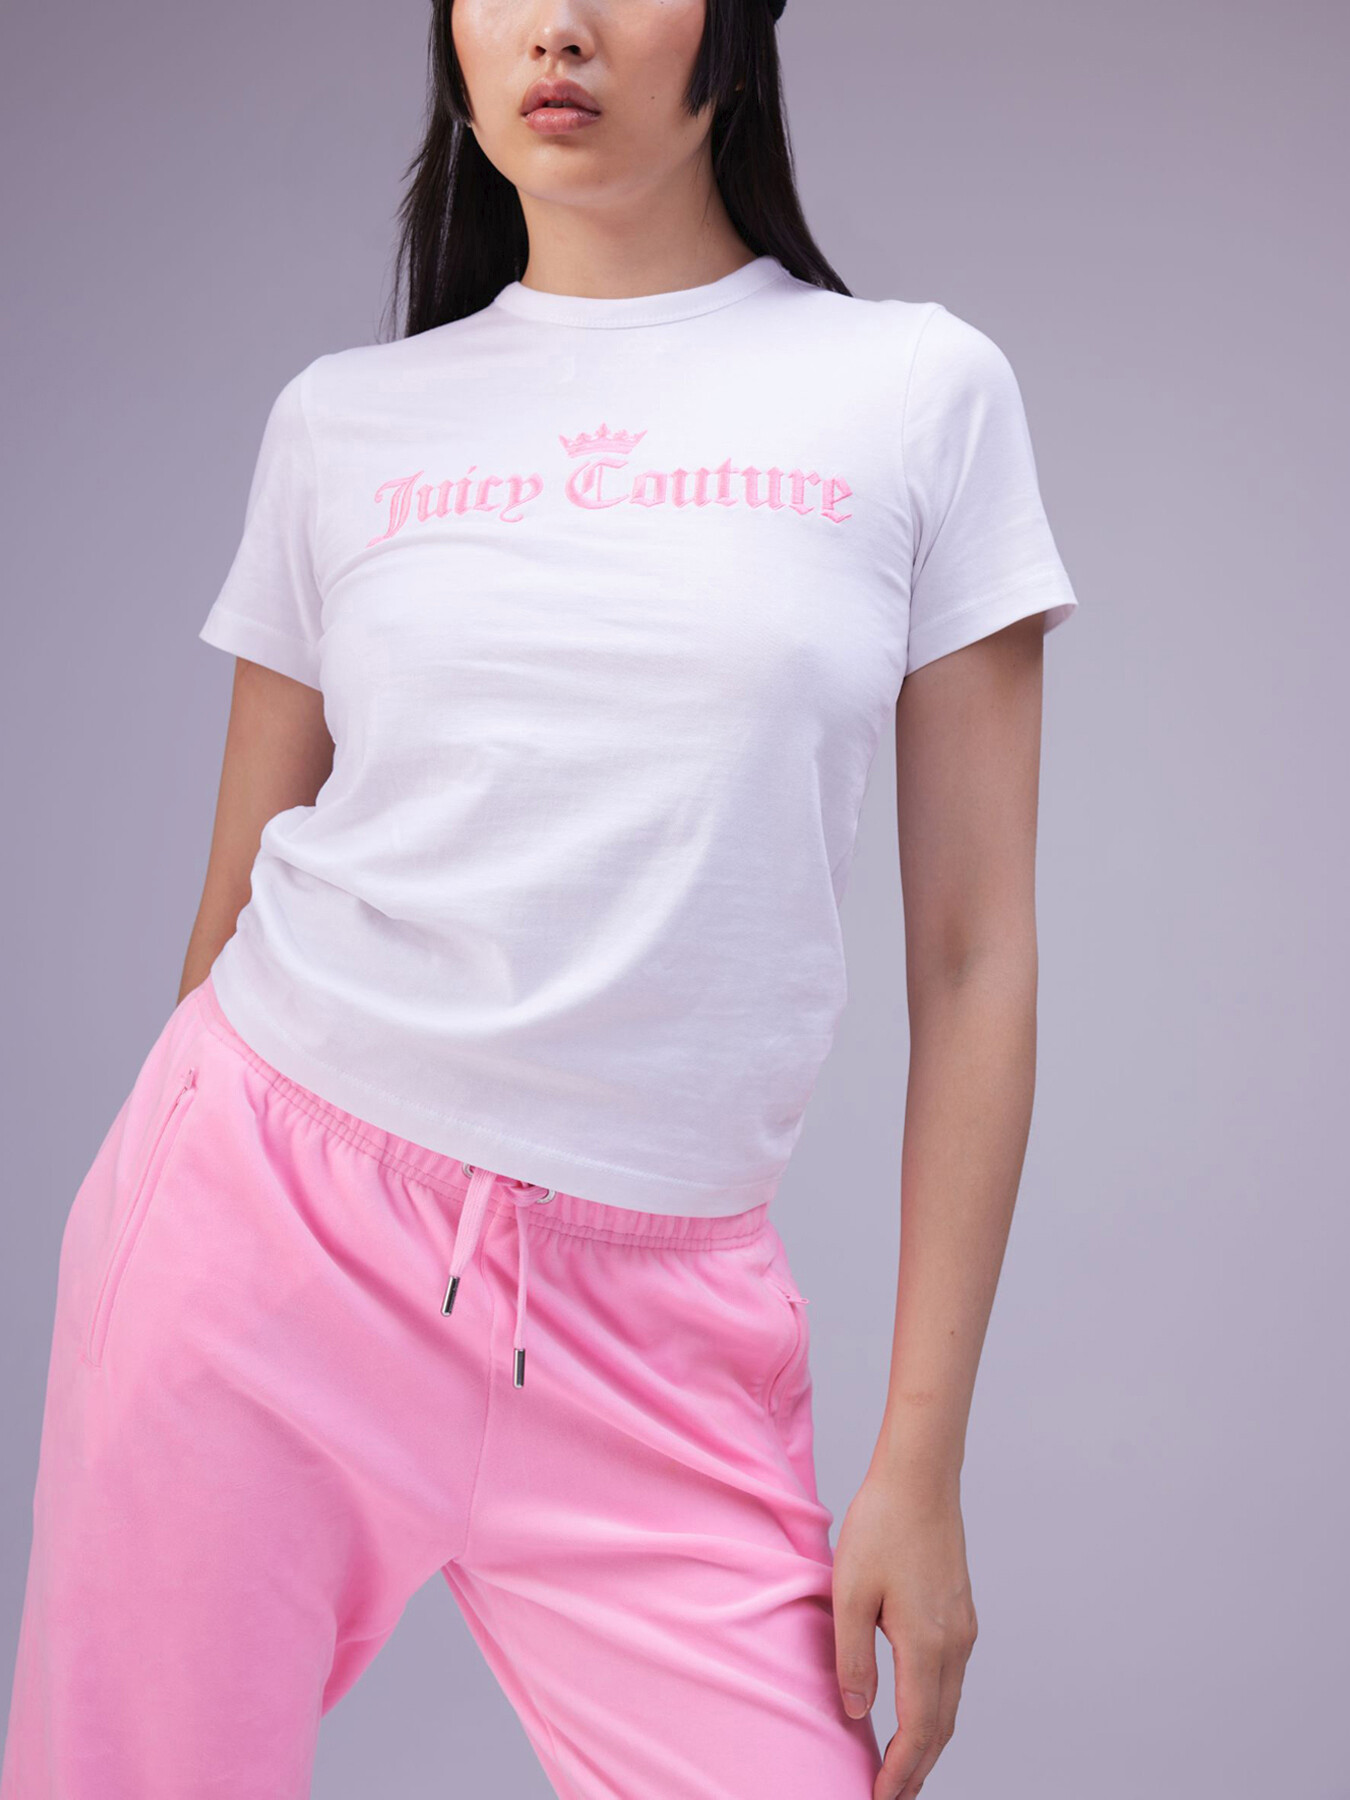 Juicy Couture Juicy Couture Crown T-Shirt | T-Shirts | Fenwick